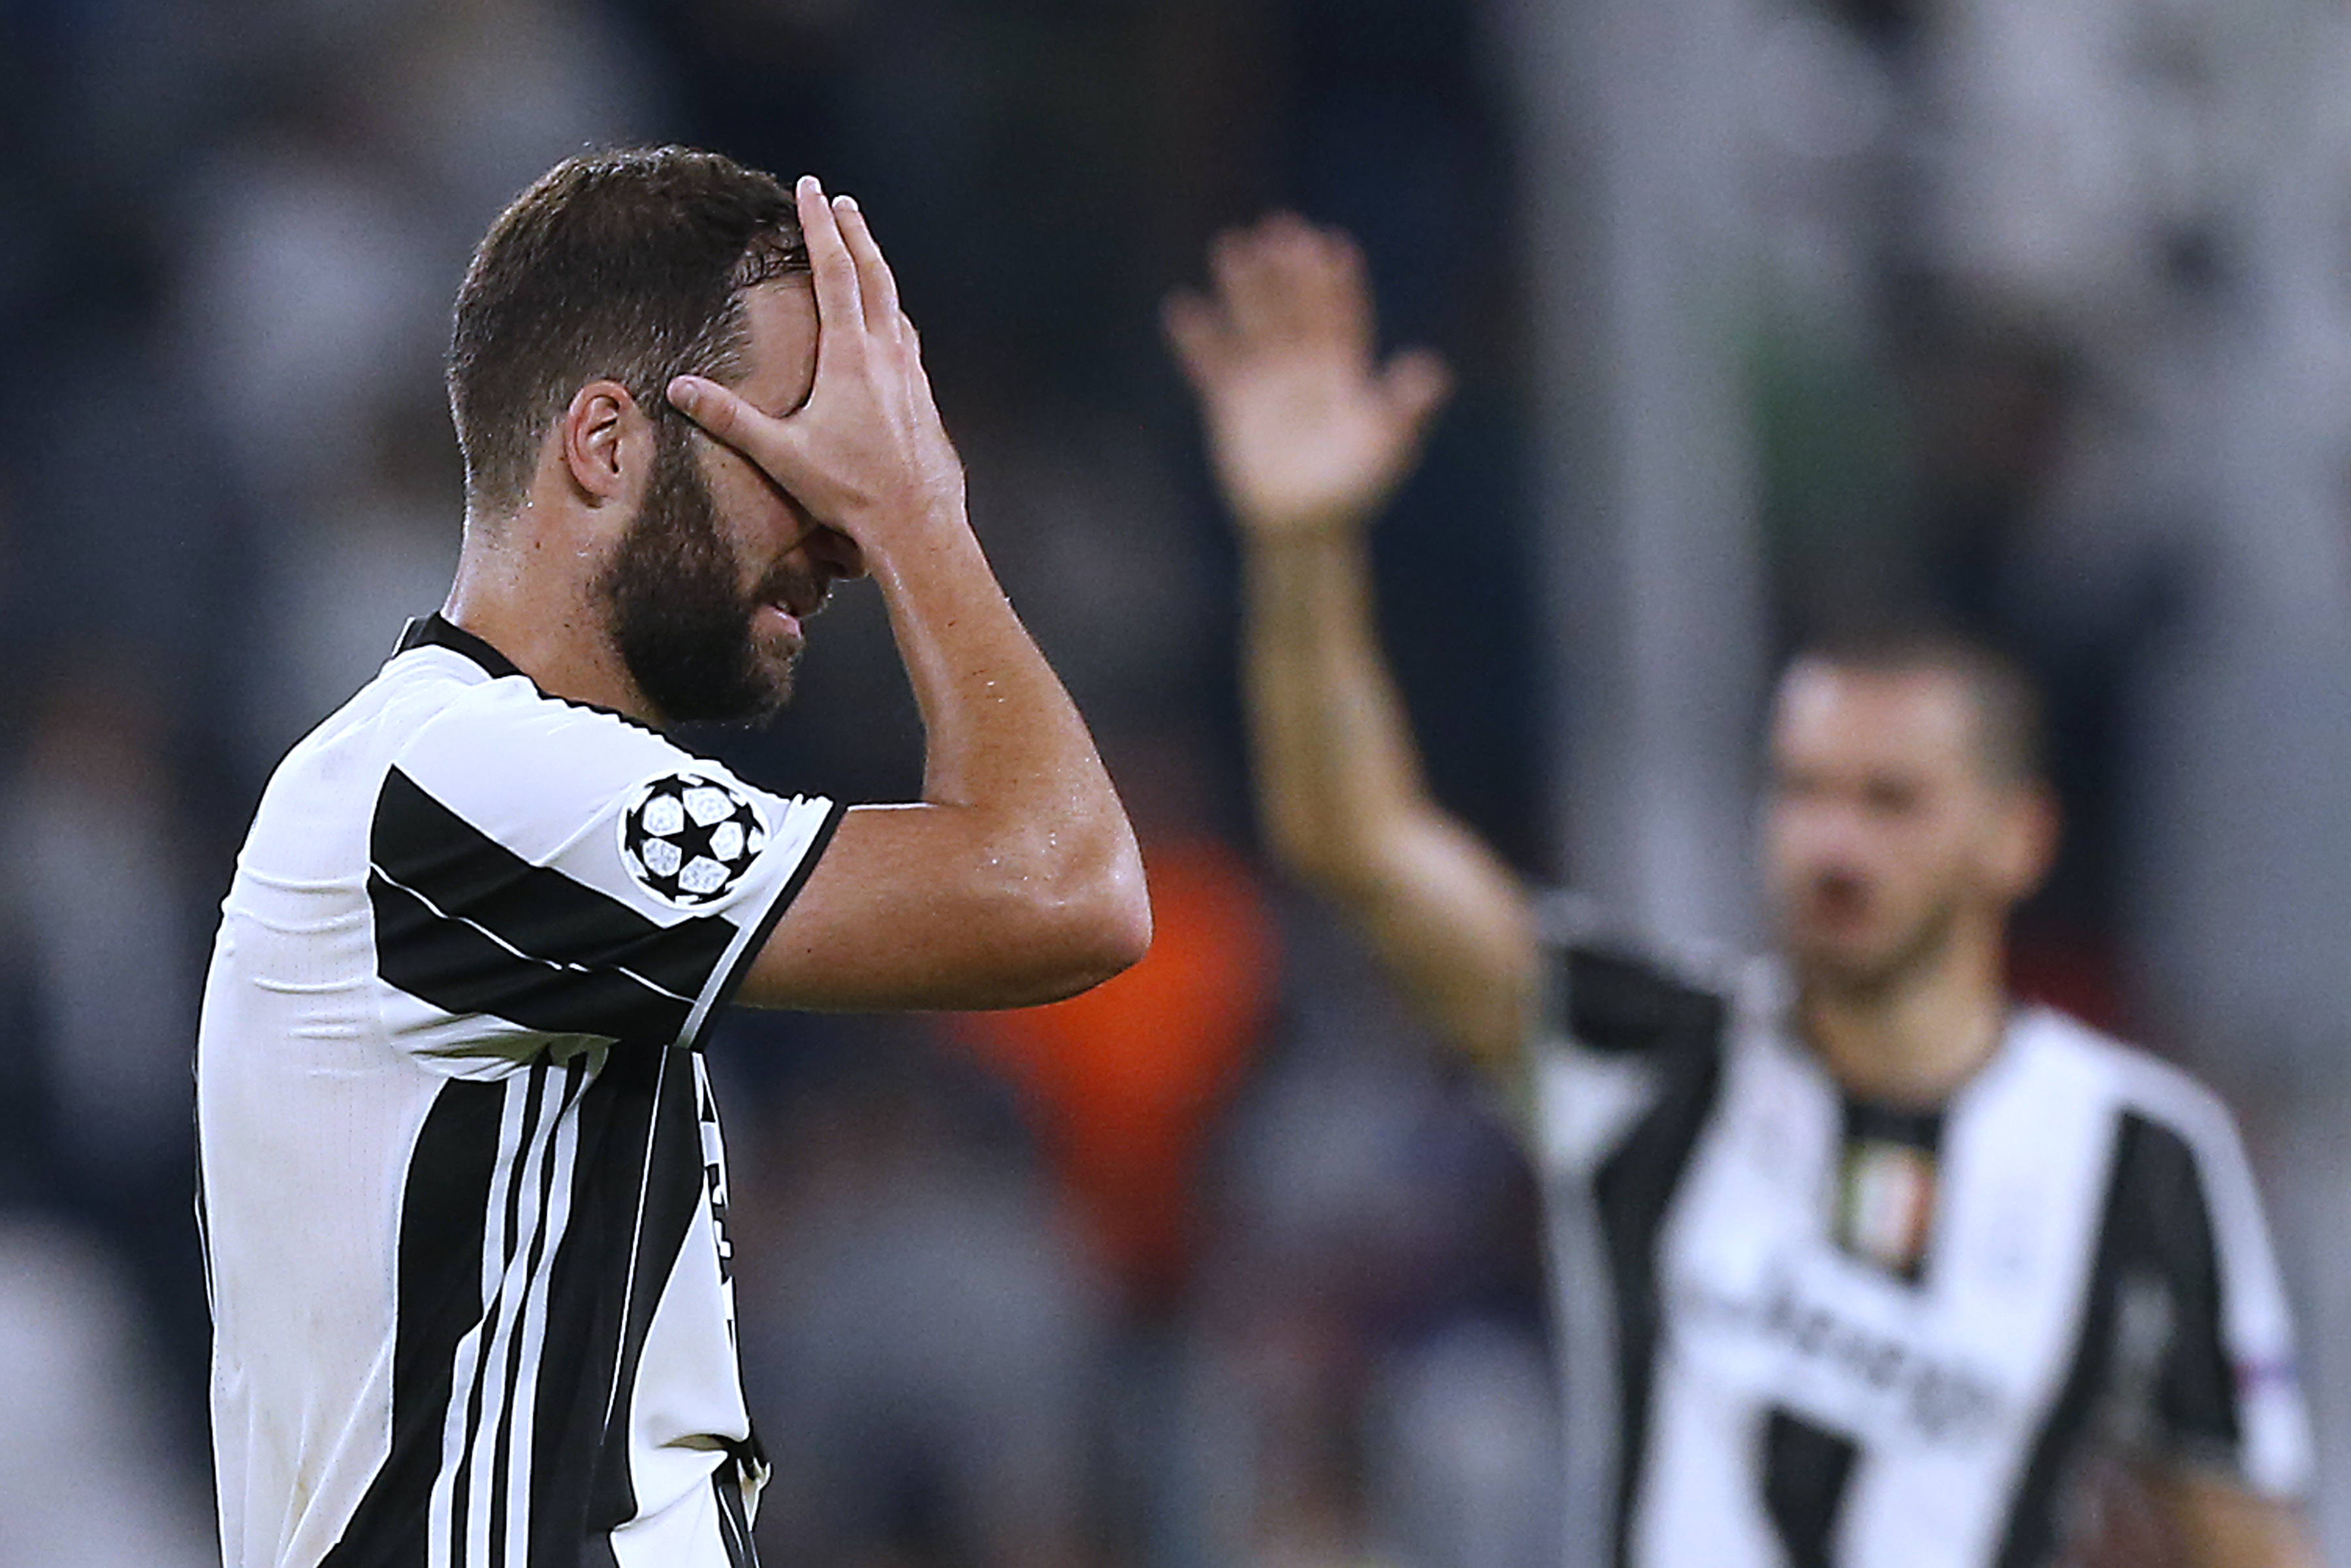 Fiorentina 2-0 Juventus: Sorry send-off for Chiellini and Dybala